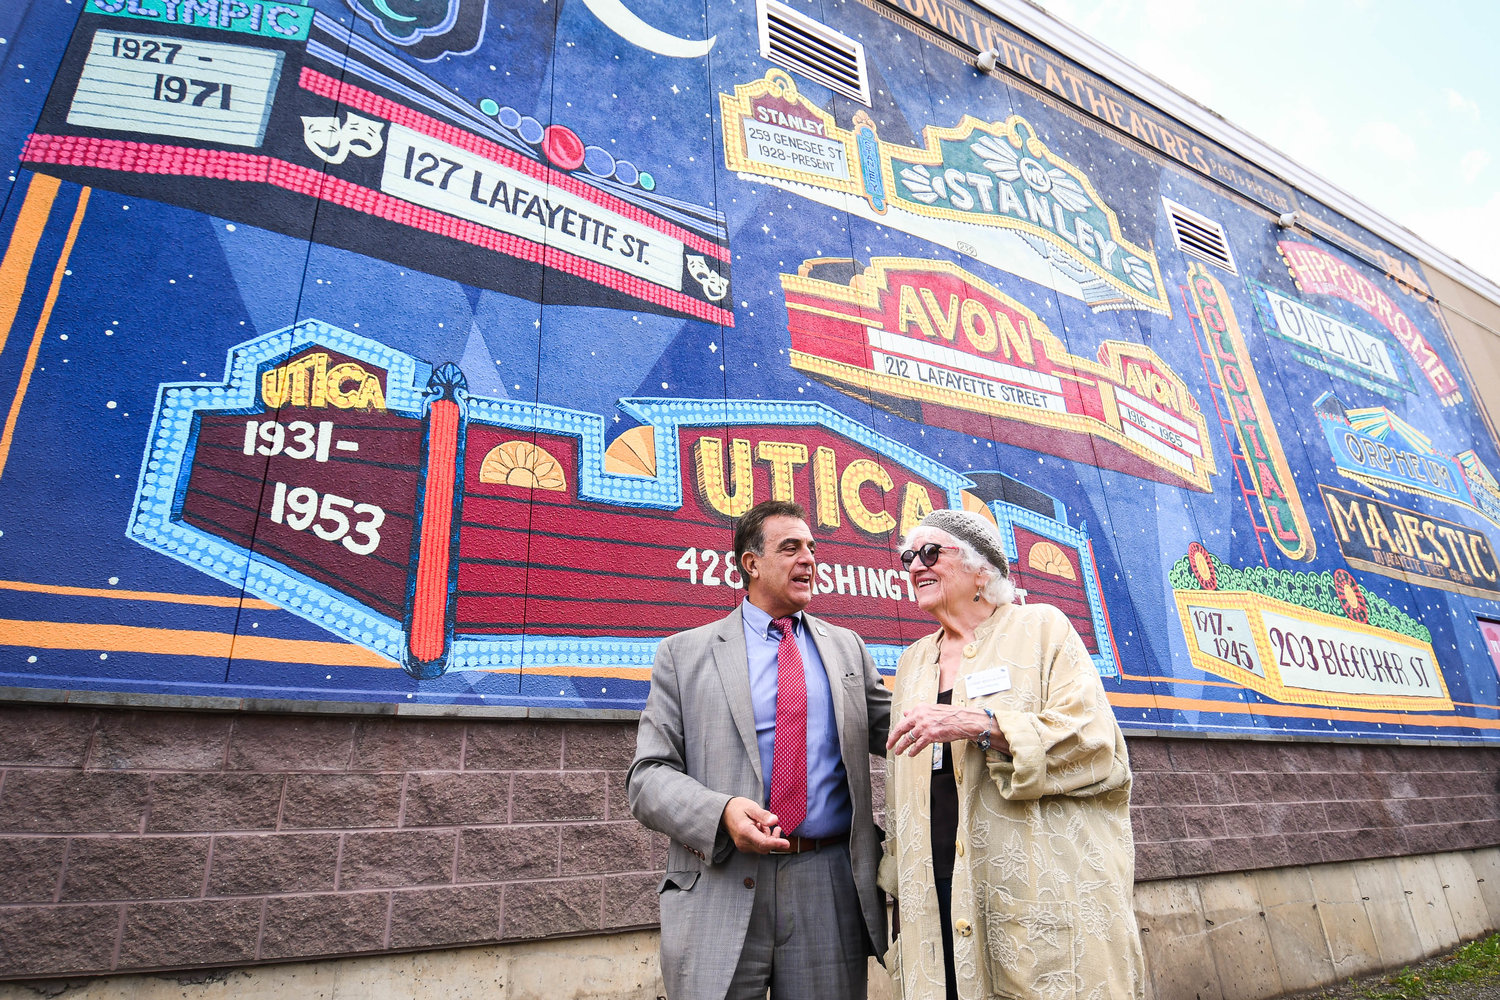 Utica Mayor Robert Palmieri talks with Lynne Mishalanie during a celebration that marked the completion of a large mural painted on the Player’s Theatre north wall on Tuesday, Oct. 25, in downtown Utica. The mural features recreations of nine downtown Utica movie theater marquees from the early 1900s to the mid ‘60s, and was painted by Maria Vallese of Retro Sorrento.